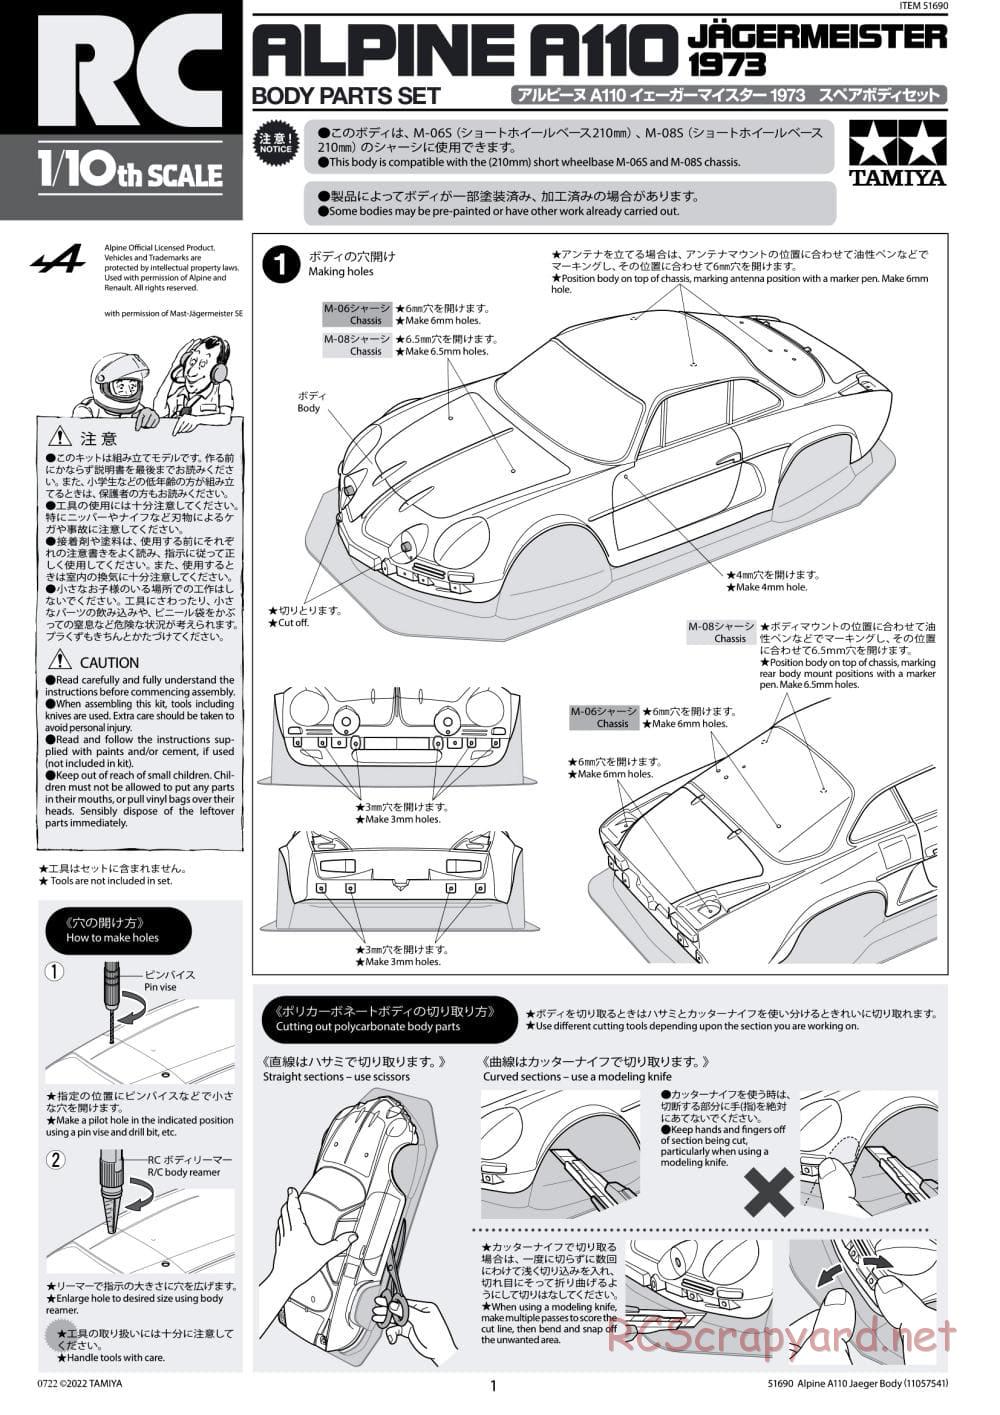 Tamiya - Alpine A110 Jagermeister 1973 - M-06 Chassis - Body Manual - Page 1